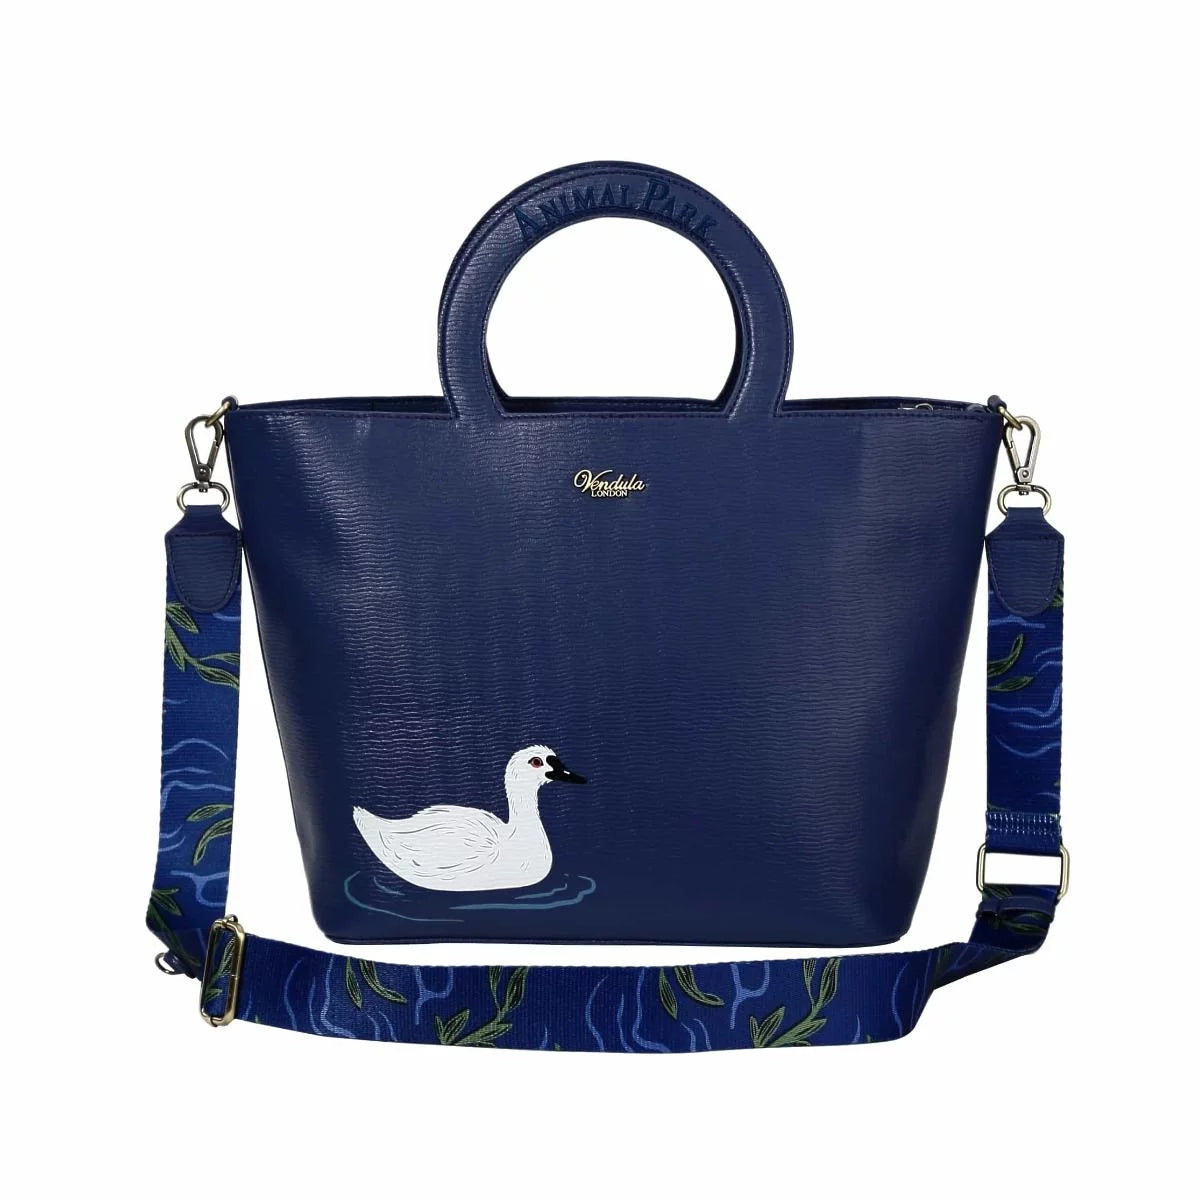 Animal Park - Black Swan Cut Out Handle Tote